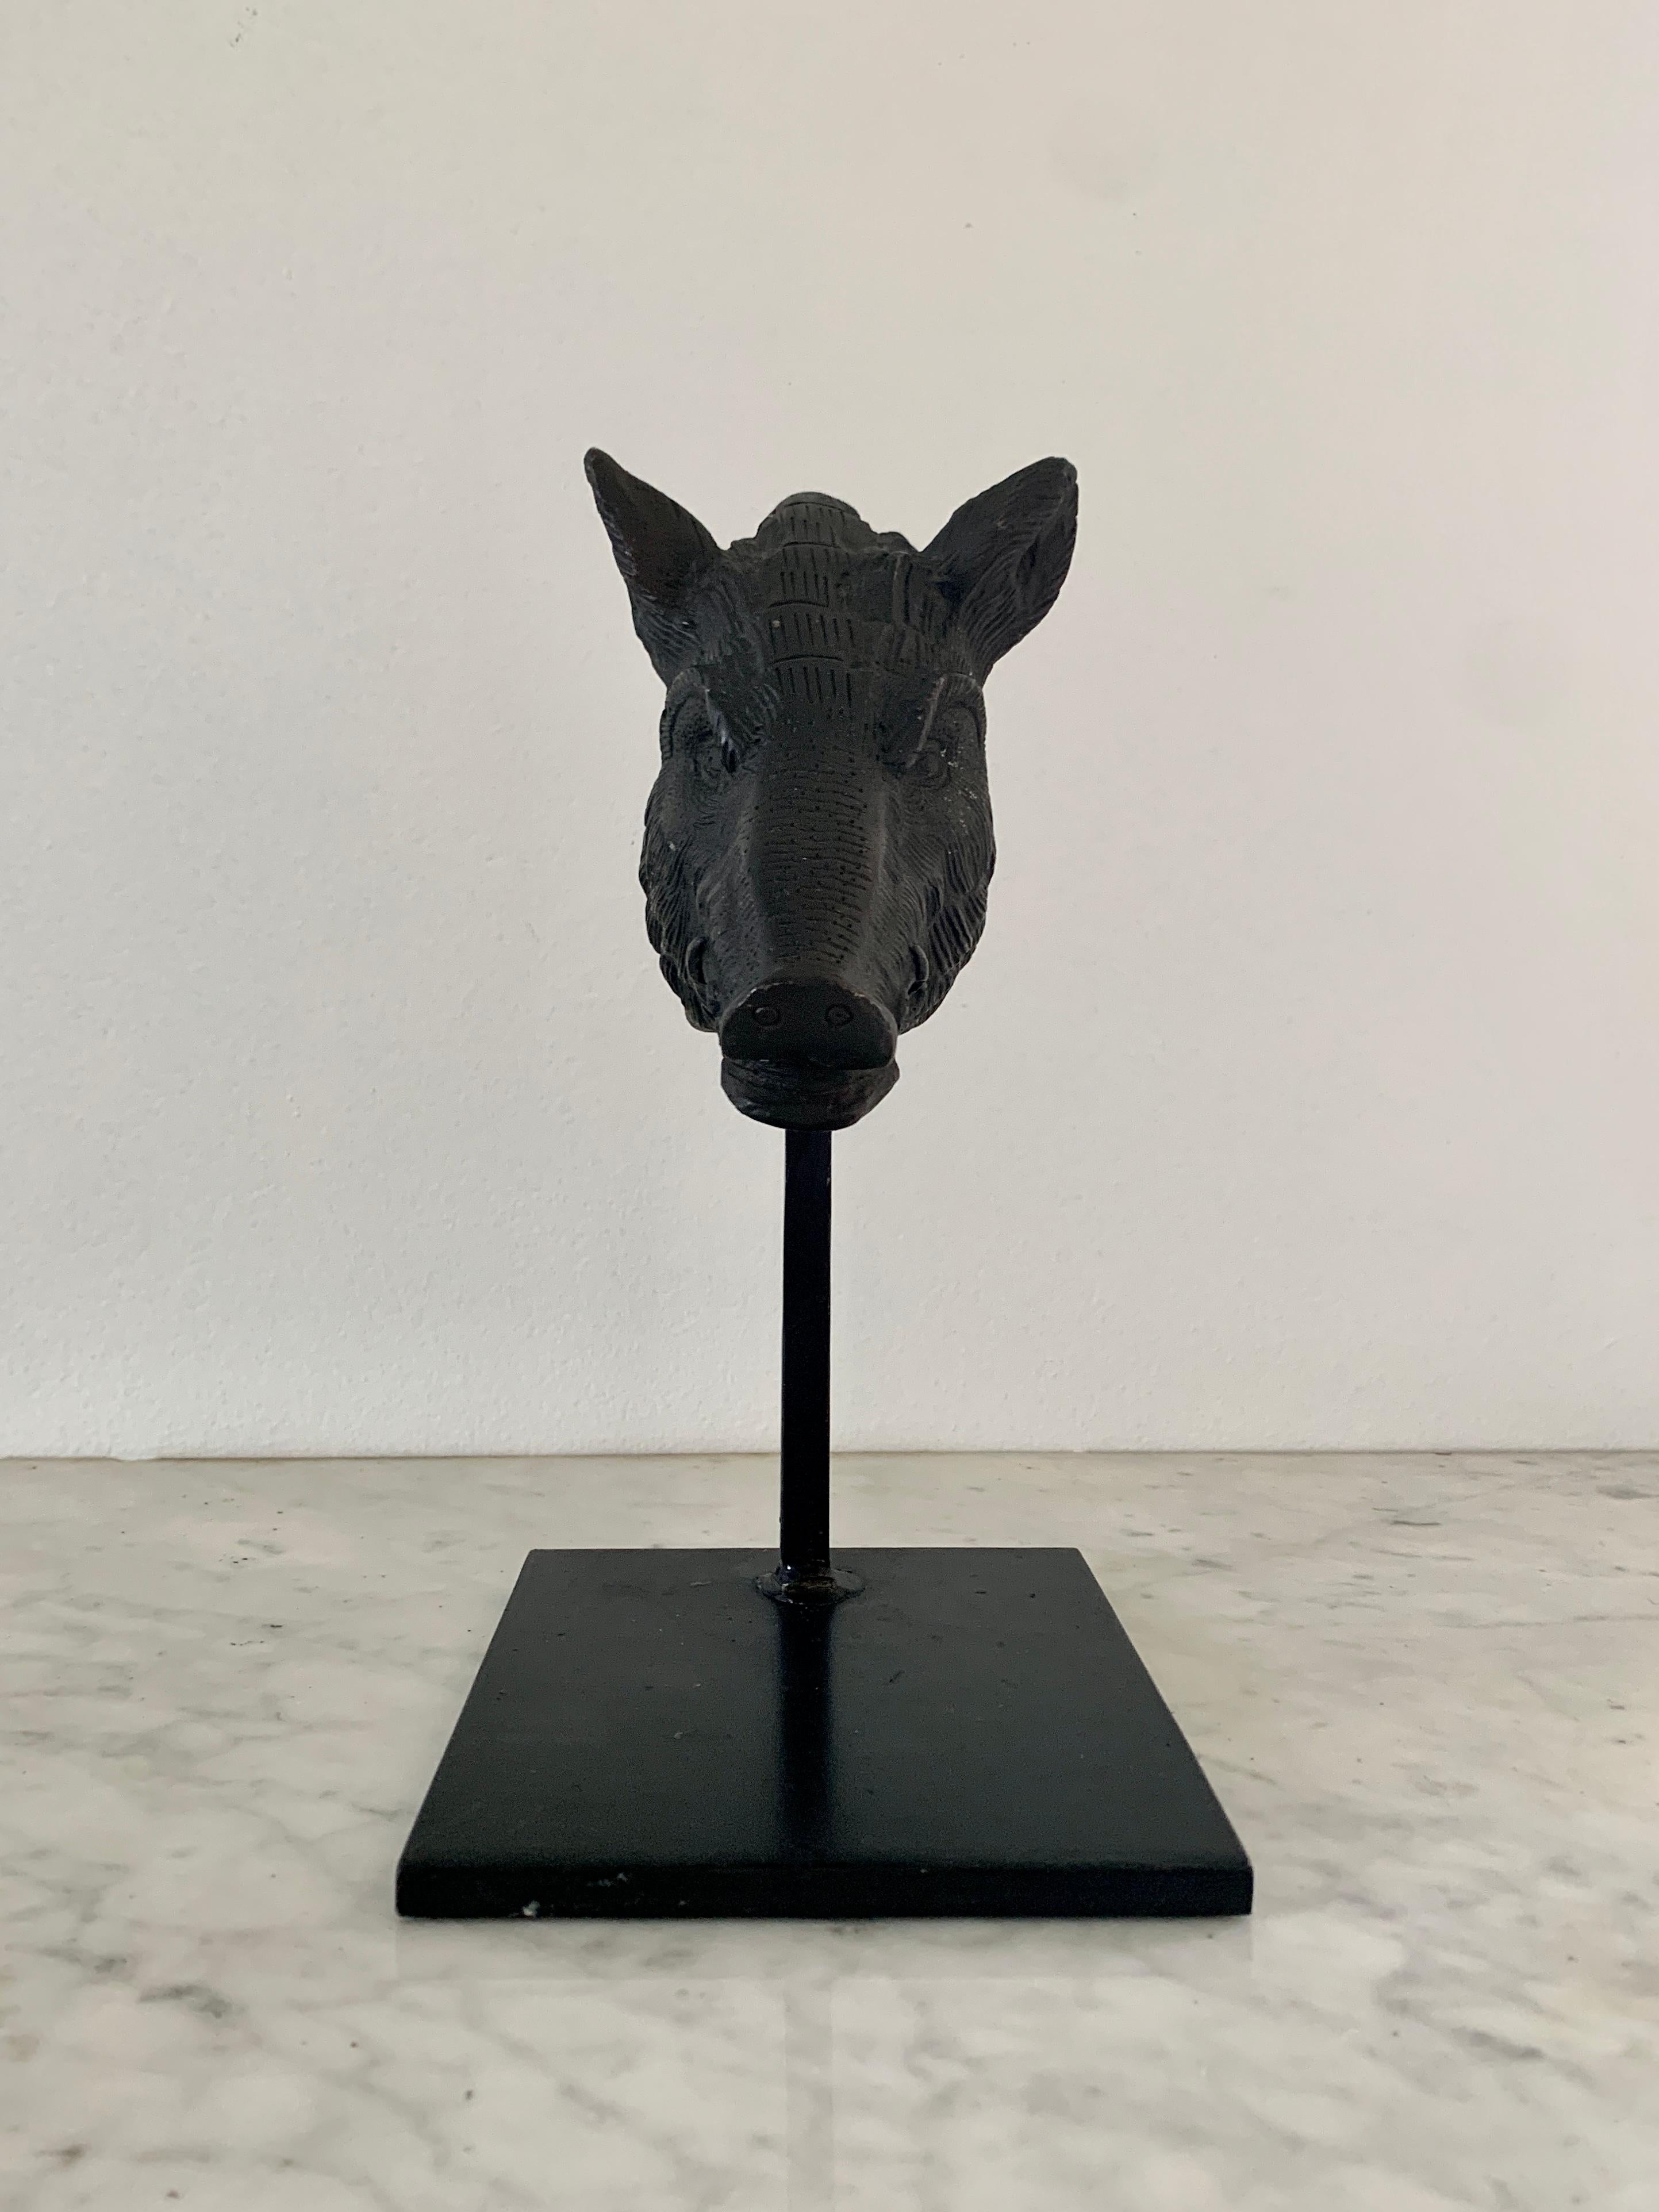 A stunning bust of a boar's head mounted on a custom stand

20th Century

Forged iron bust, on custom steel stand

Measures: 5